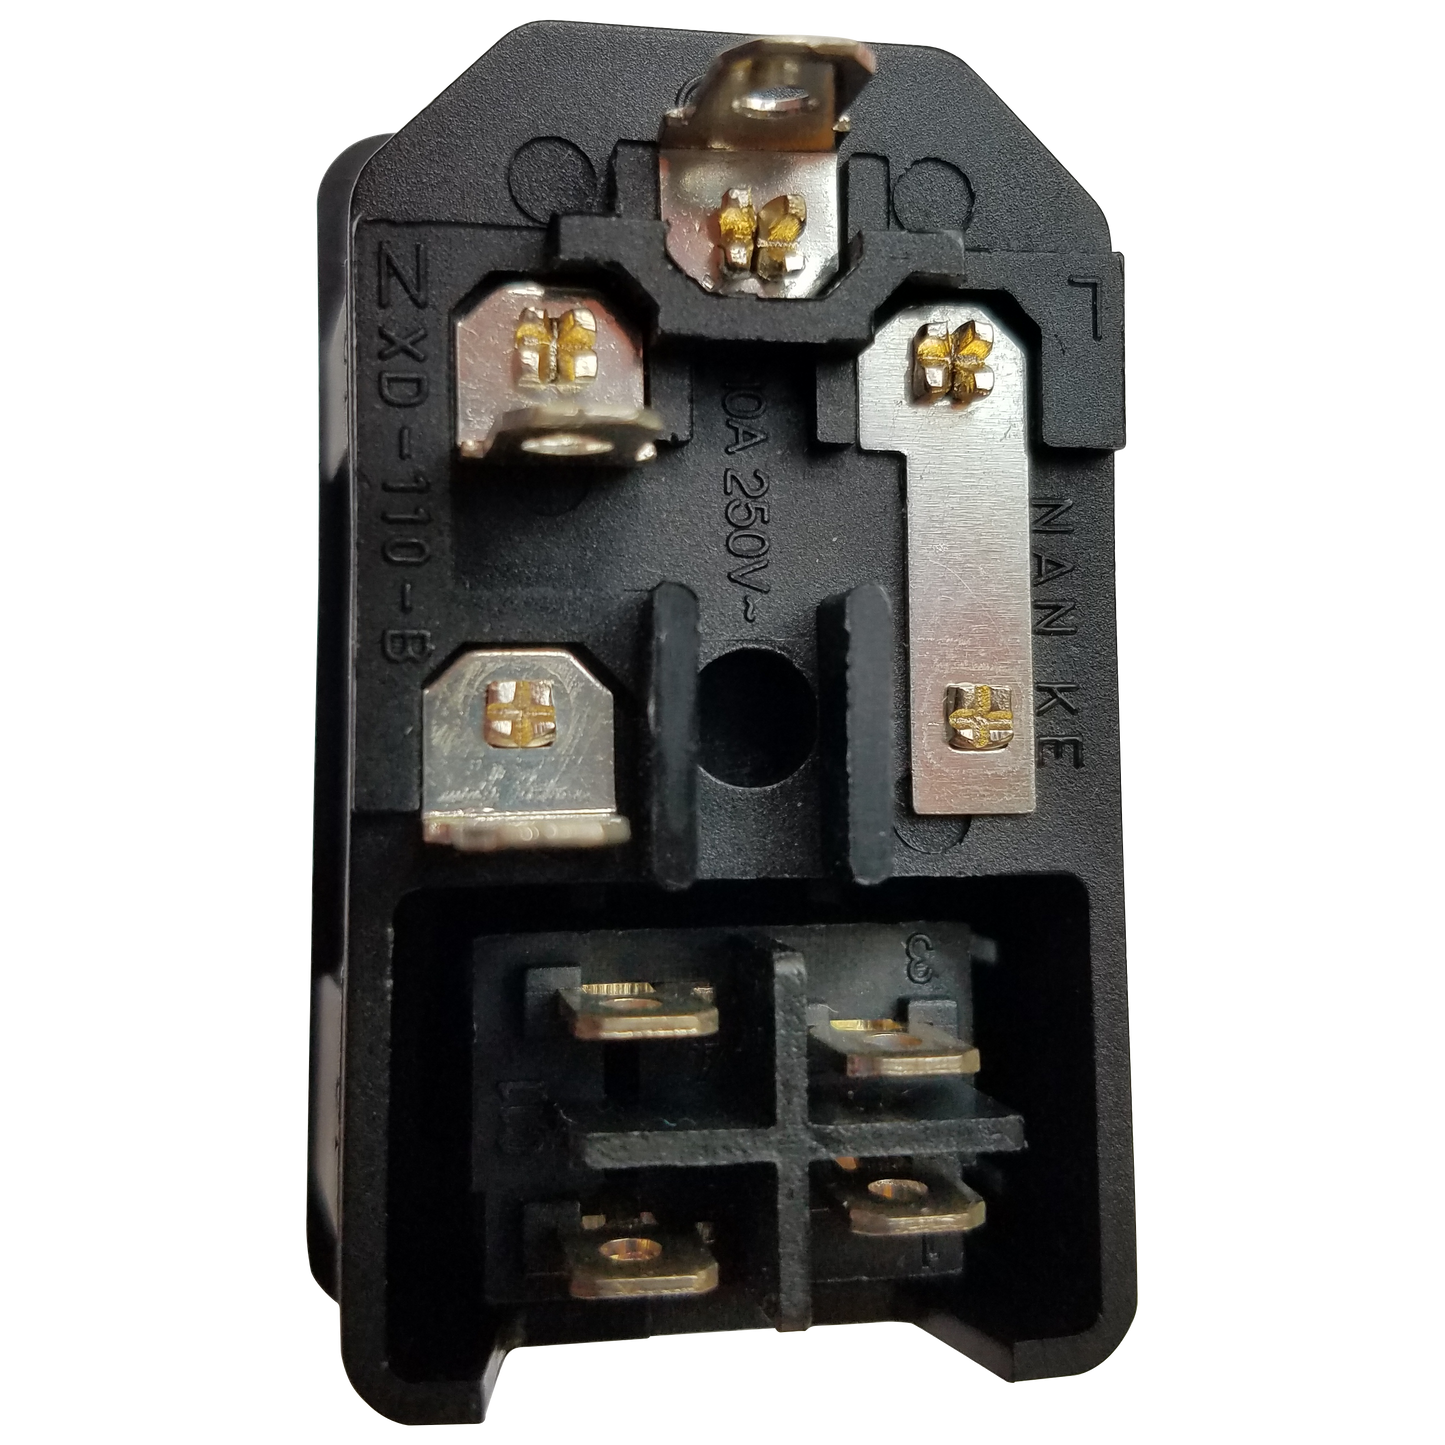 Purifier Power Switch and Fuse Holder